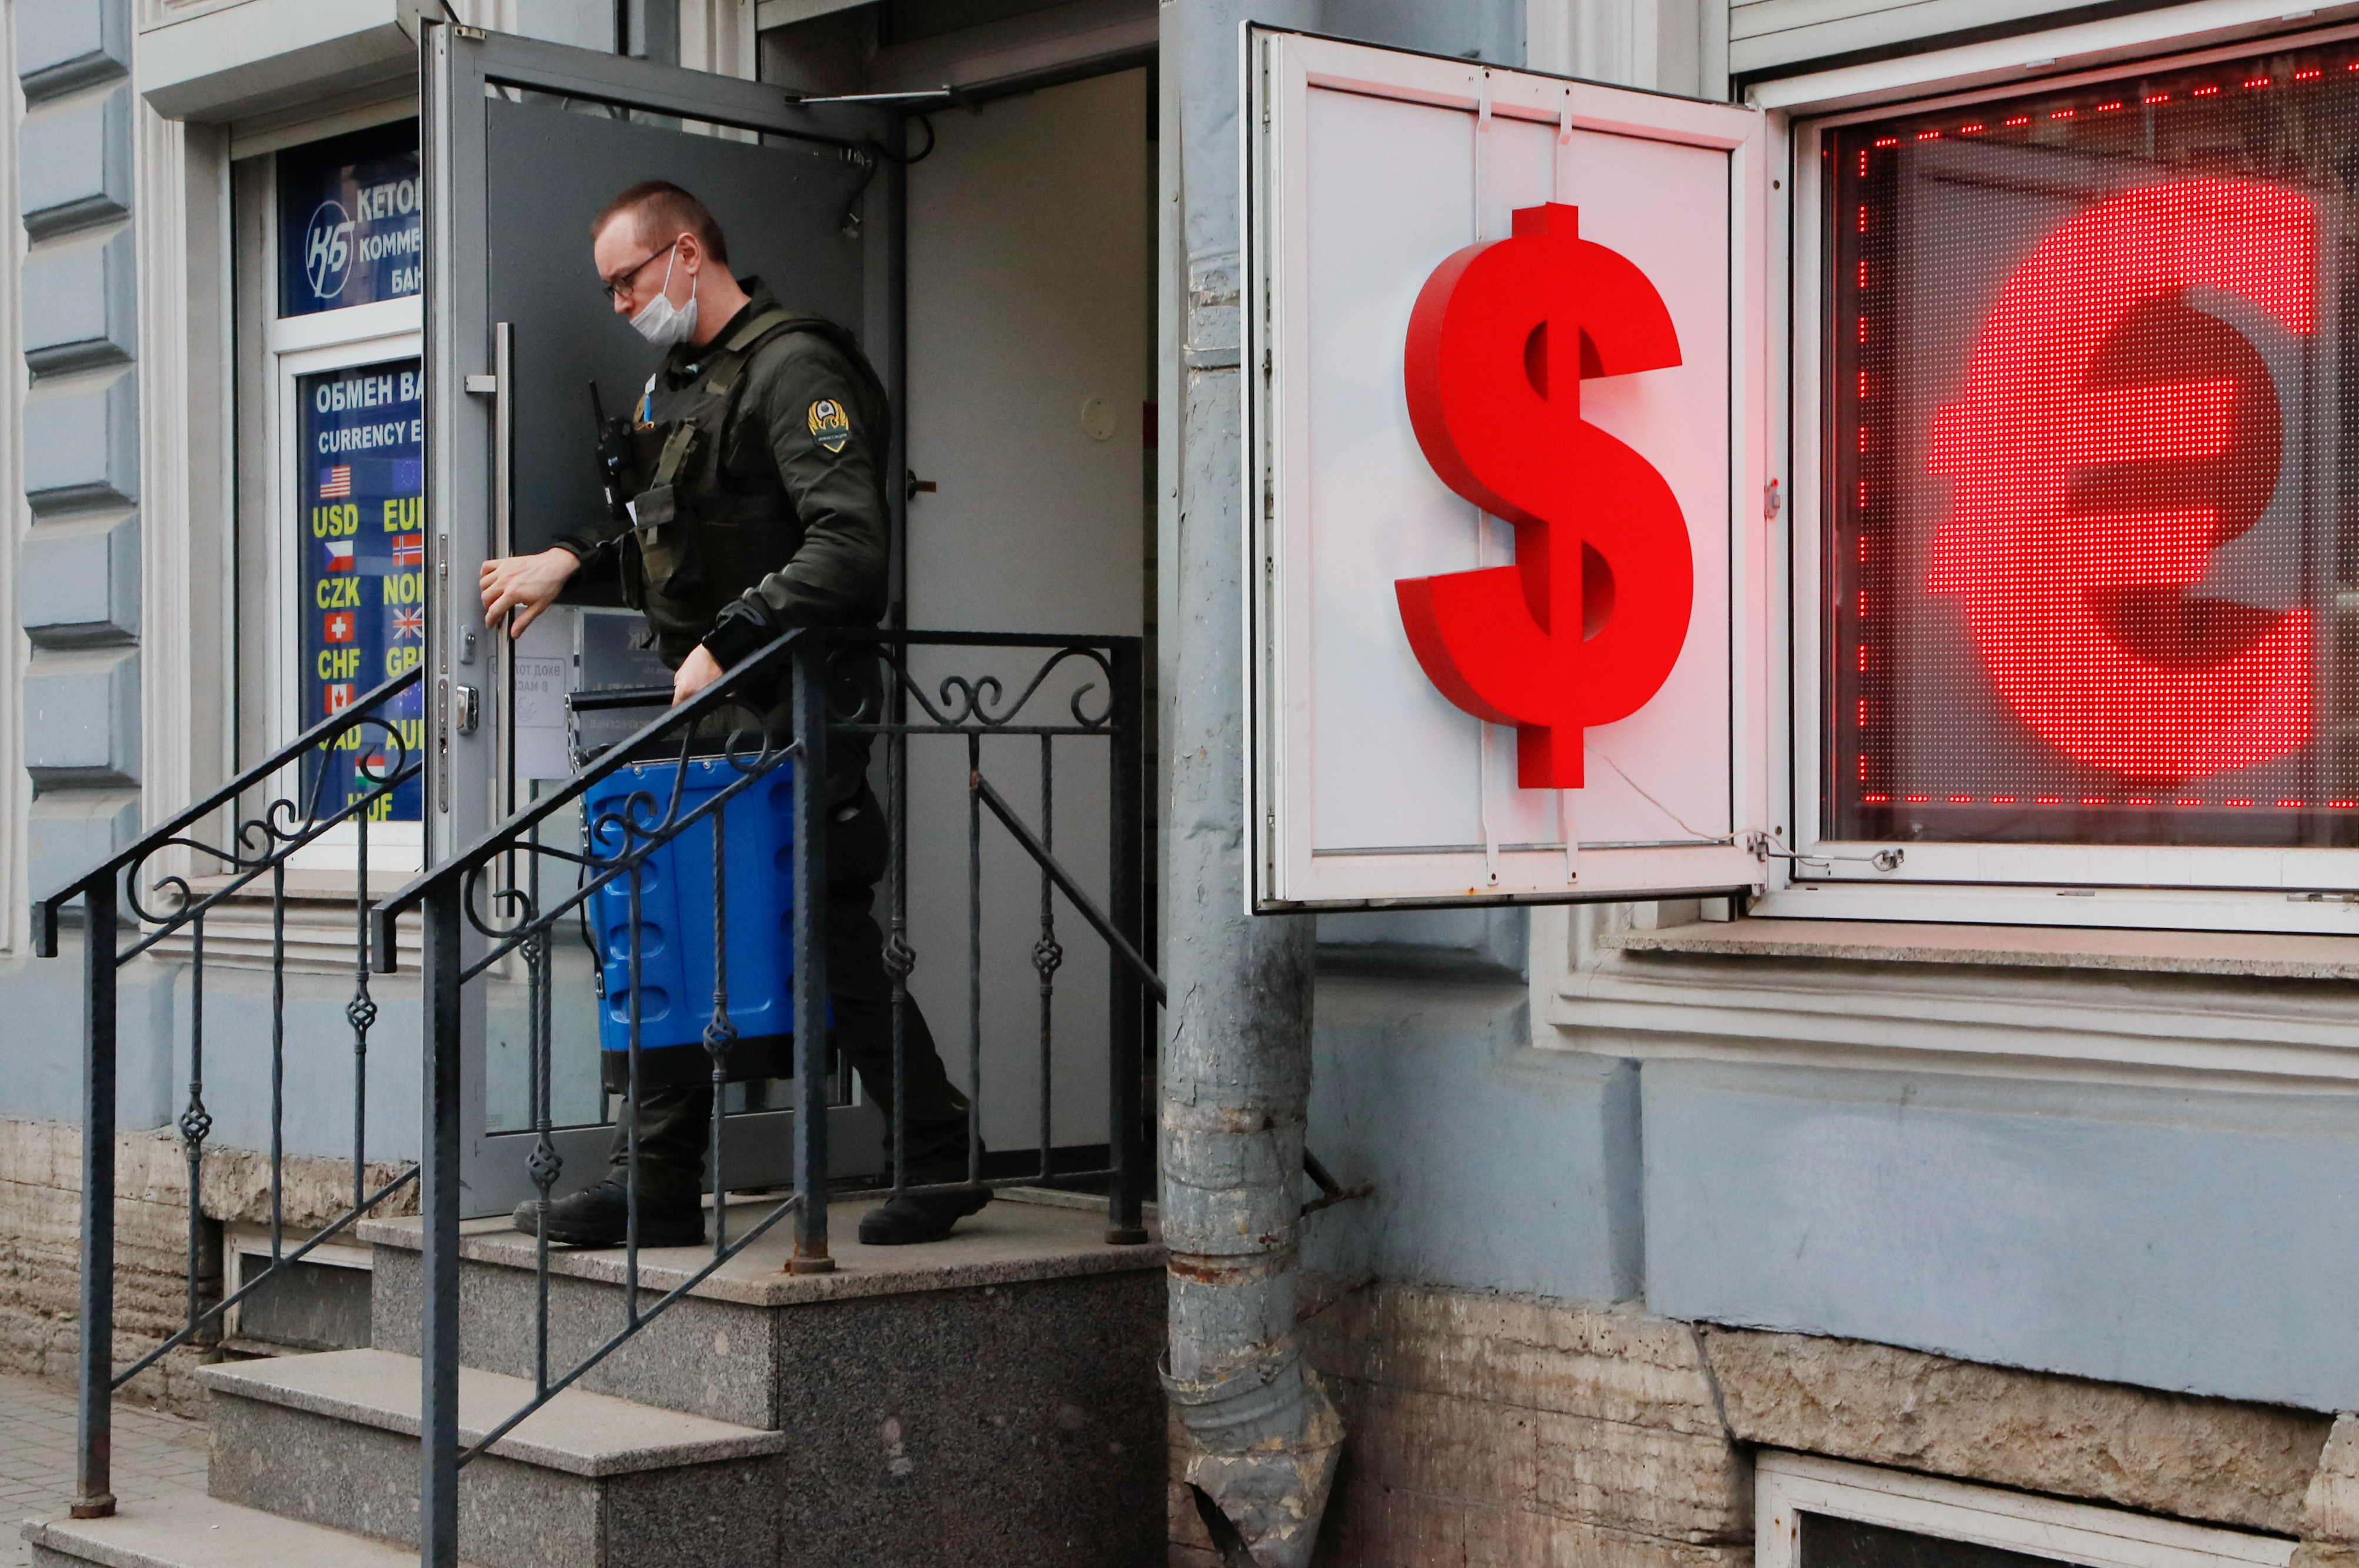 A cash-in-transit worker leaves a currency exchange office in Saint Petersburg